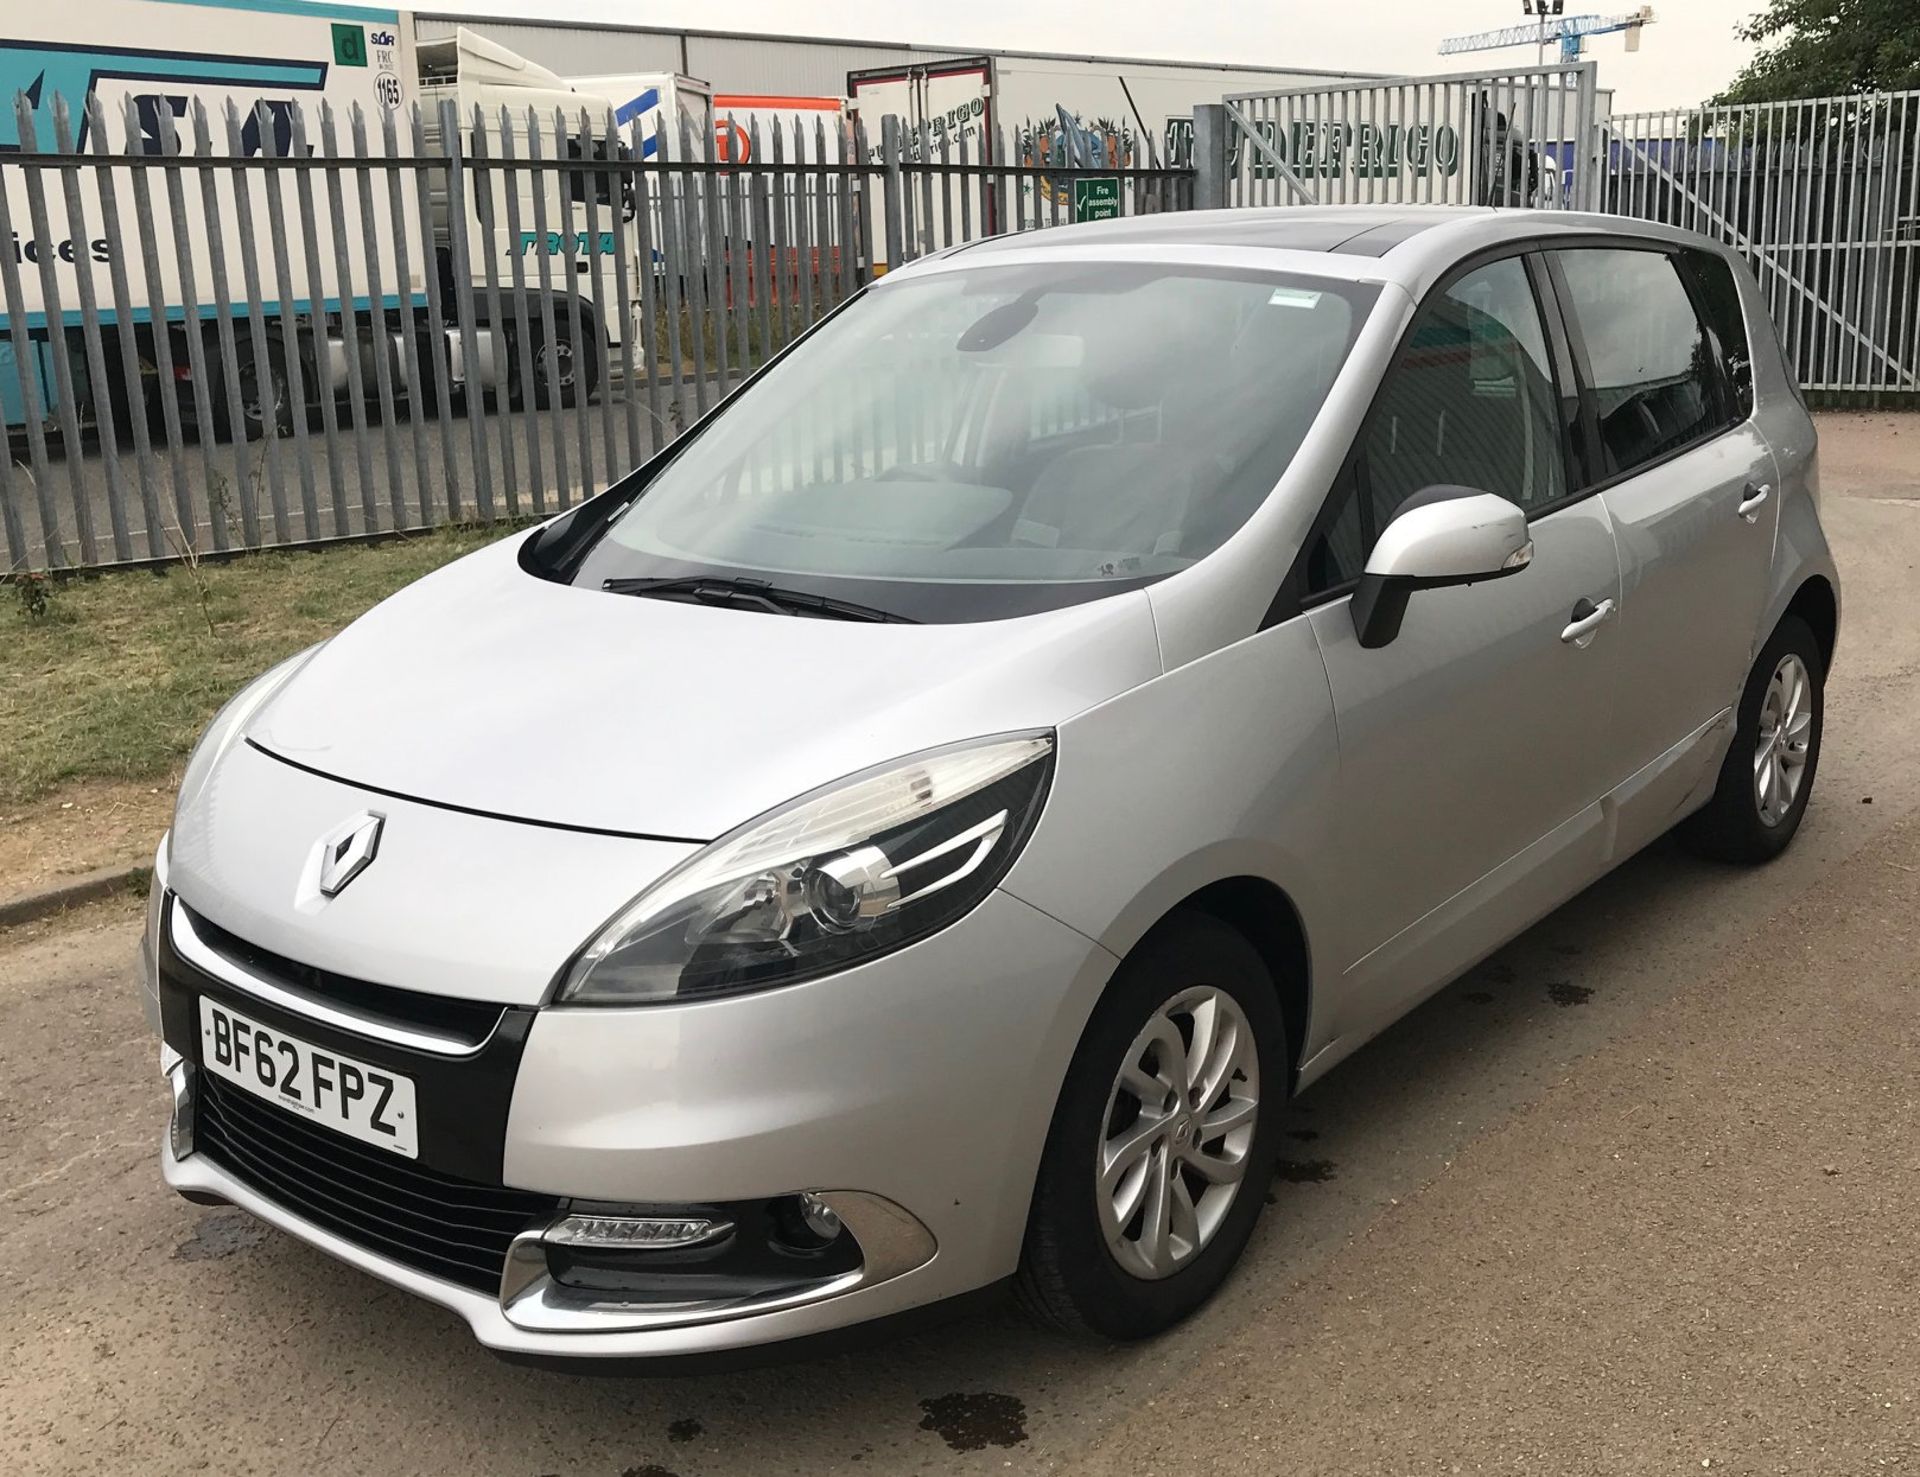 2012 Renault Scenic 1.5 Dci D-Que Tt Energy 5 Dr MPV - CL505 - NO VAT ON THE HAMMER - Location: Corb - Image 12 of 15